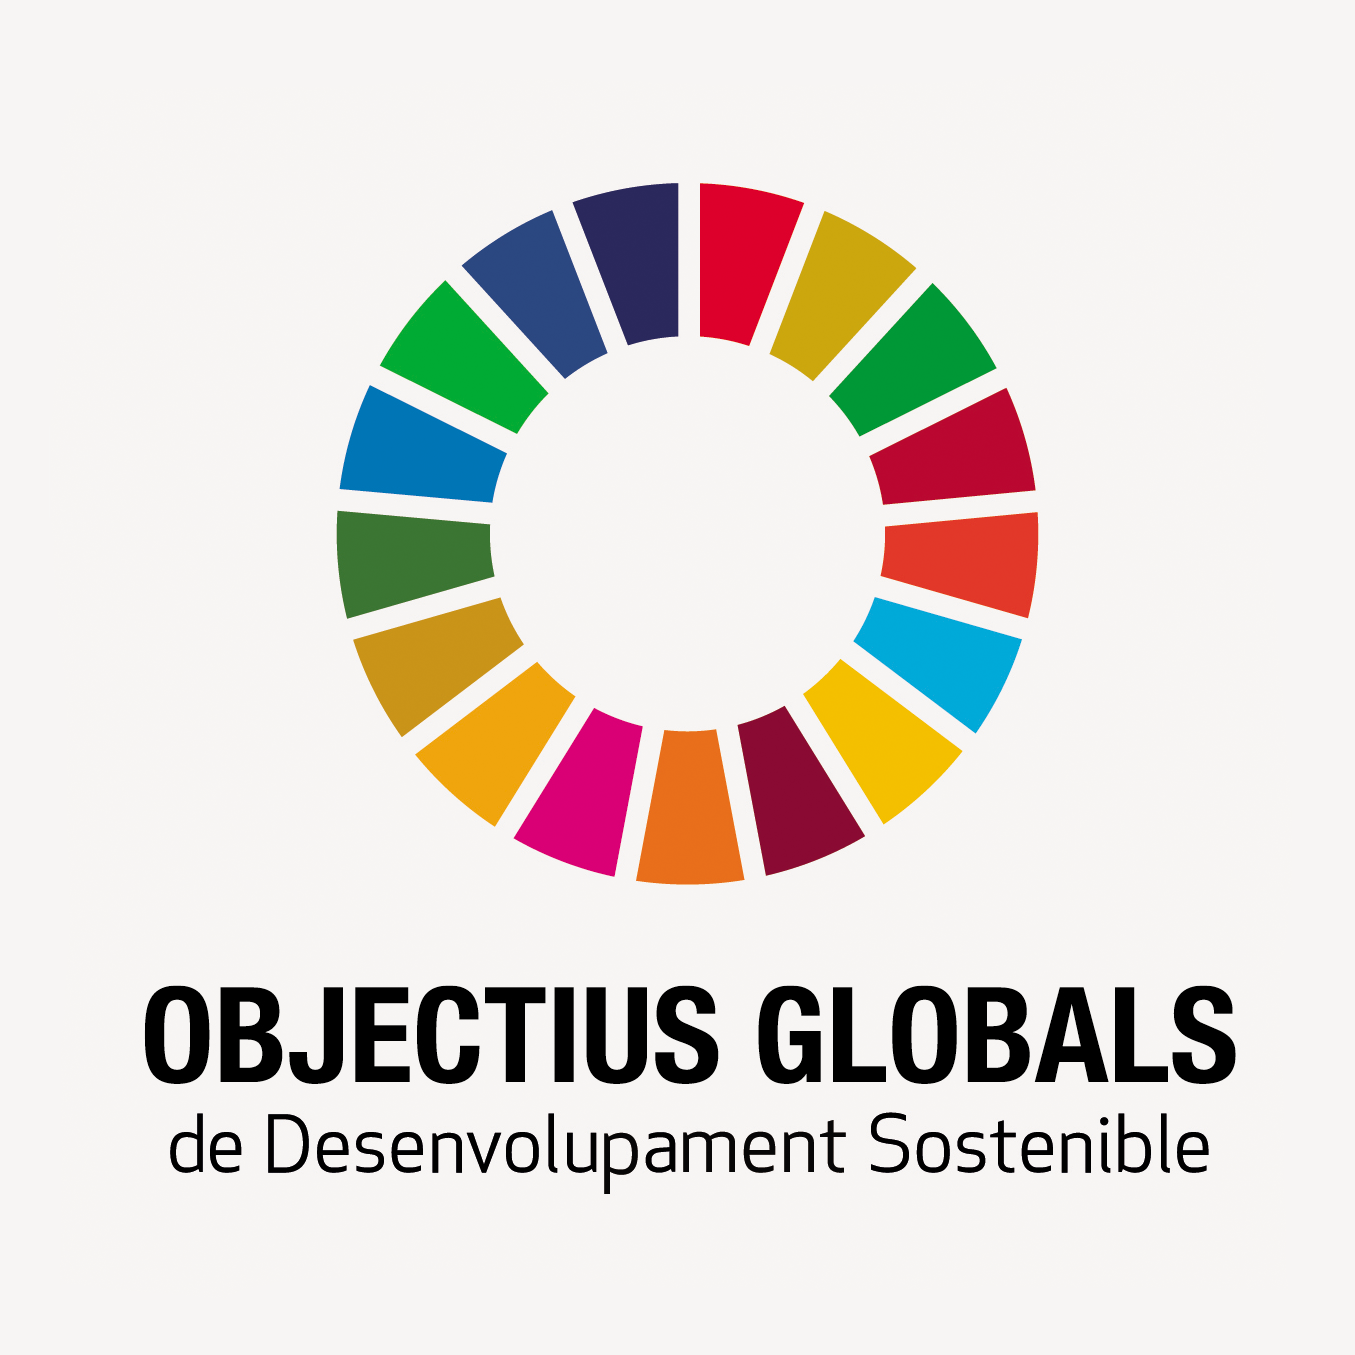 The Global Goals for Sustainable Development